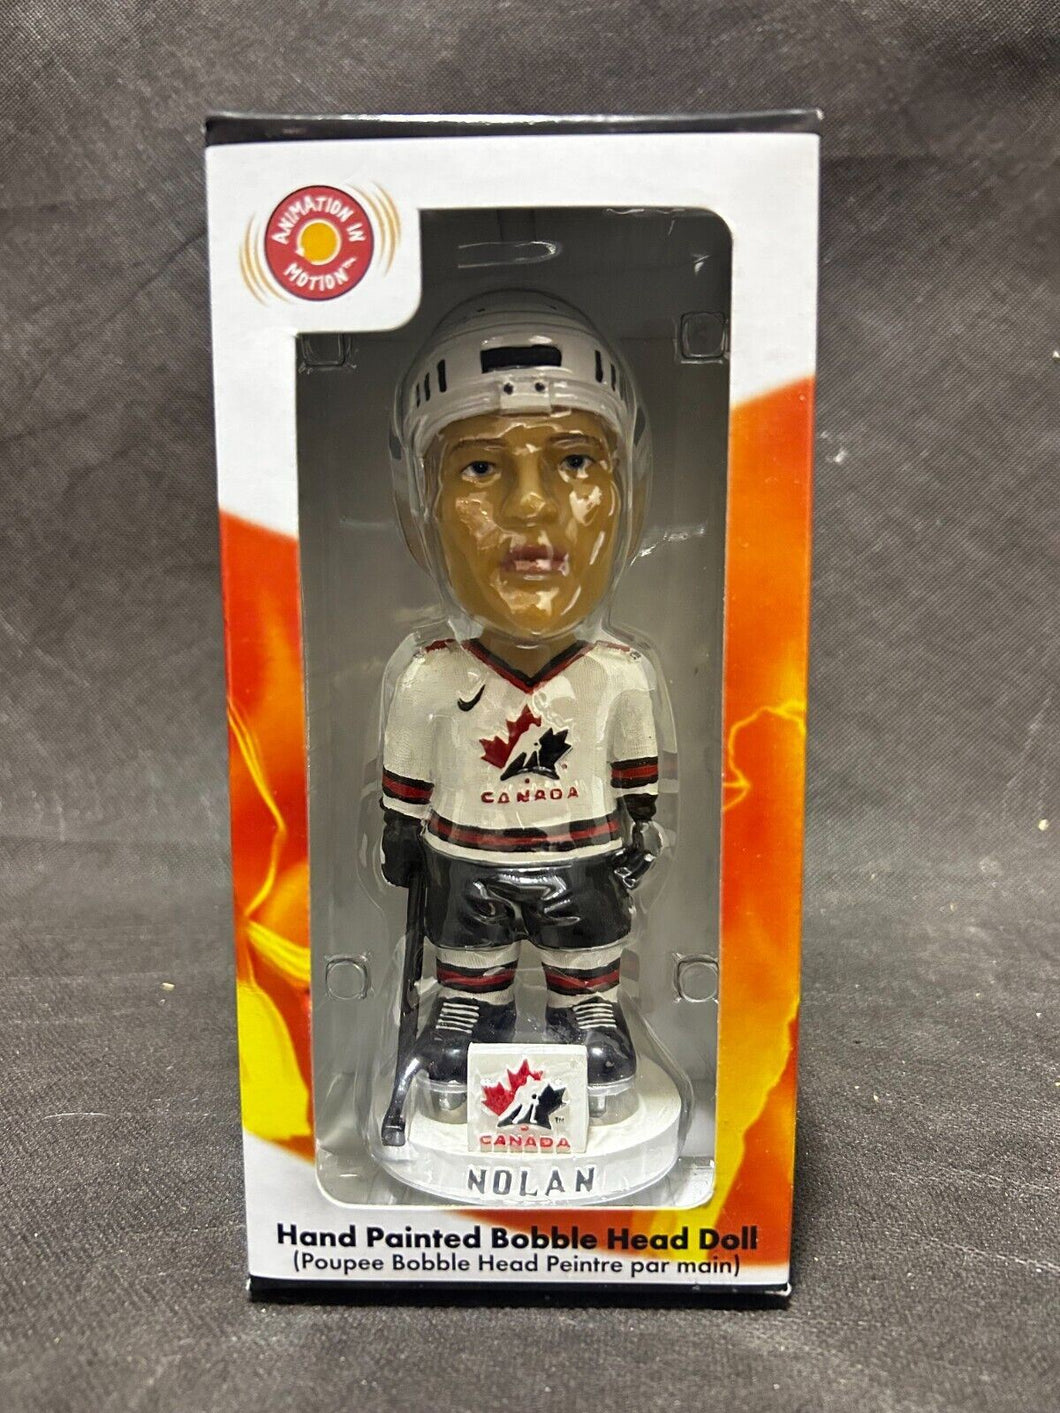 2002 Olympics Collectible Hand Painted Bobble Head Doll of Nolan Team Canada